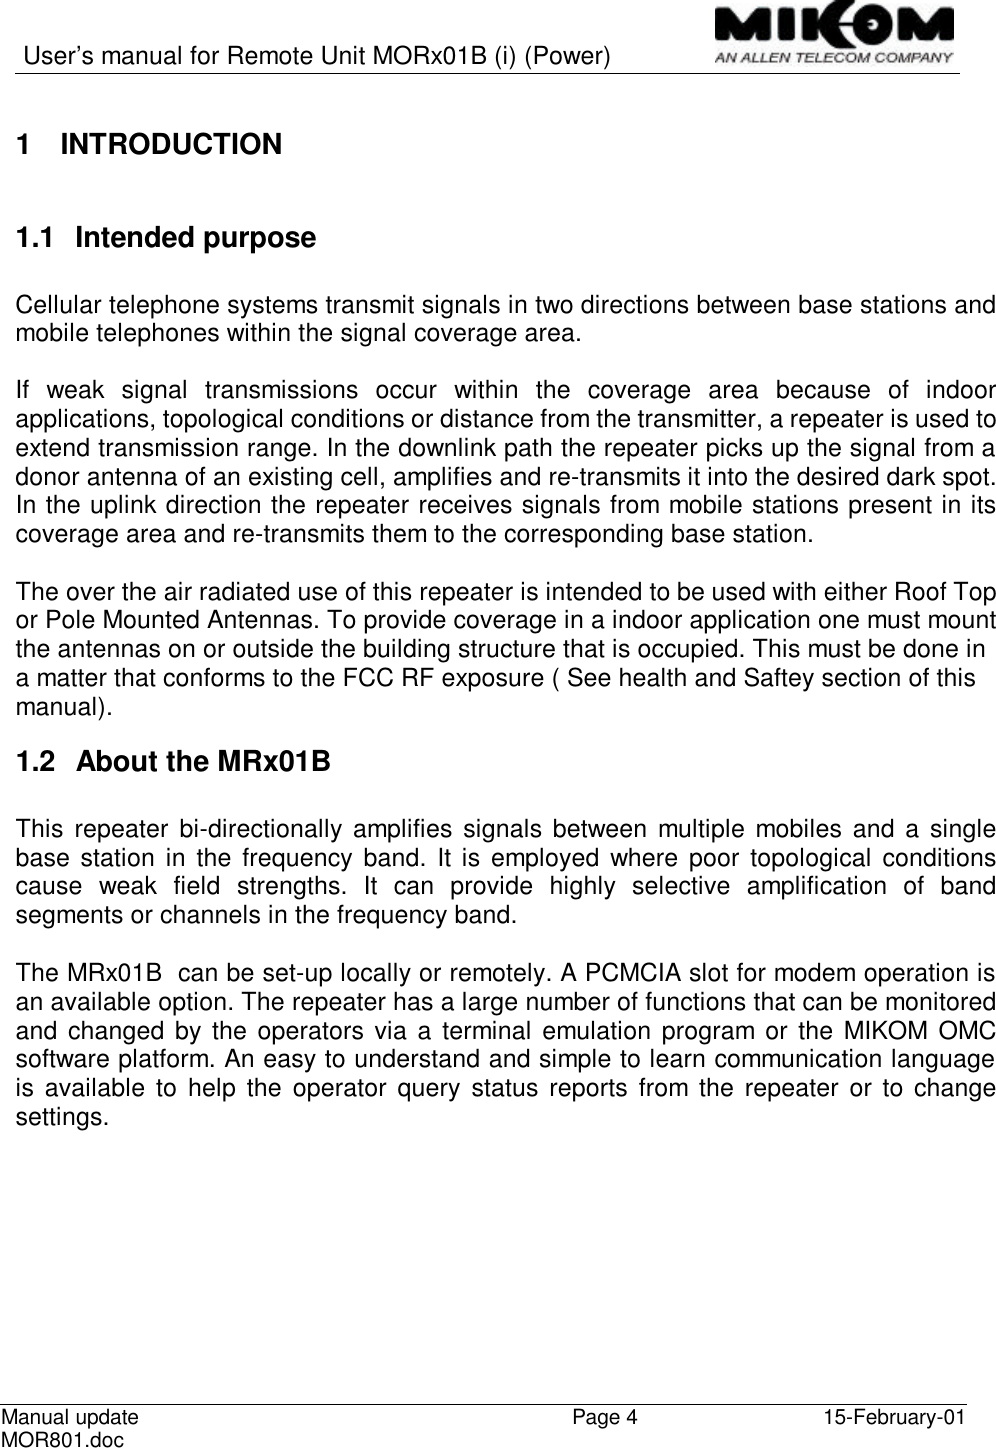   User’s manual for Remote Unit MORx01B (i) (Power)   Manual update MOR801.doc  Page 4 15-February-01  1 INTRODUCTION  1.1 Intended purpose  Cellular telephone systems transmit signals in two directions between base stations and mobile telephones within the signal coverage area.  If weak signal transmissions occur within the coverage area because of indoor applications, topological conditions or distance from the transmitter, a repeater is used to extend transmission range. In the downlink path the repeater picks up the signal from a donor antenna of an existing cell, amplifies and re-transmits it into the desired dark spot. In the uplink direction the repeater receives signals from mobile stations present in its coverage area and re-transmits them to the corresponding base station.  The over the air radiated use of this repeater is intended to be used with either Roof Top or Pole Mounted Antennas. To provide coverage in a indoor application one must mount the antennas on or outside the building structure that is occupied. This must be done in a matter that conforms to the FCC RF exposure ( See health and Saftey section of this manual). 1.2 About the MRx01B   This repeater bi-directionally amplifies signals between multiple mobiles and a single base station in the frequency band. It is employed where poor topological conditions cause weak field strengths. It can provide highly selective amplification of band segments or channels in the frequency band.  The MRx01B  can be set-up locally or remotely. A PCMCIA slot for modem operation is an available option. The repeater has a large number of functions that can be monitored and changed by the operators via a terminal emulation program or the MIKOM OMC software platform. An easy to understand and simple to learn communication language is available to help the operator query status reports from the repeater or to change settings. 